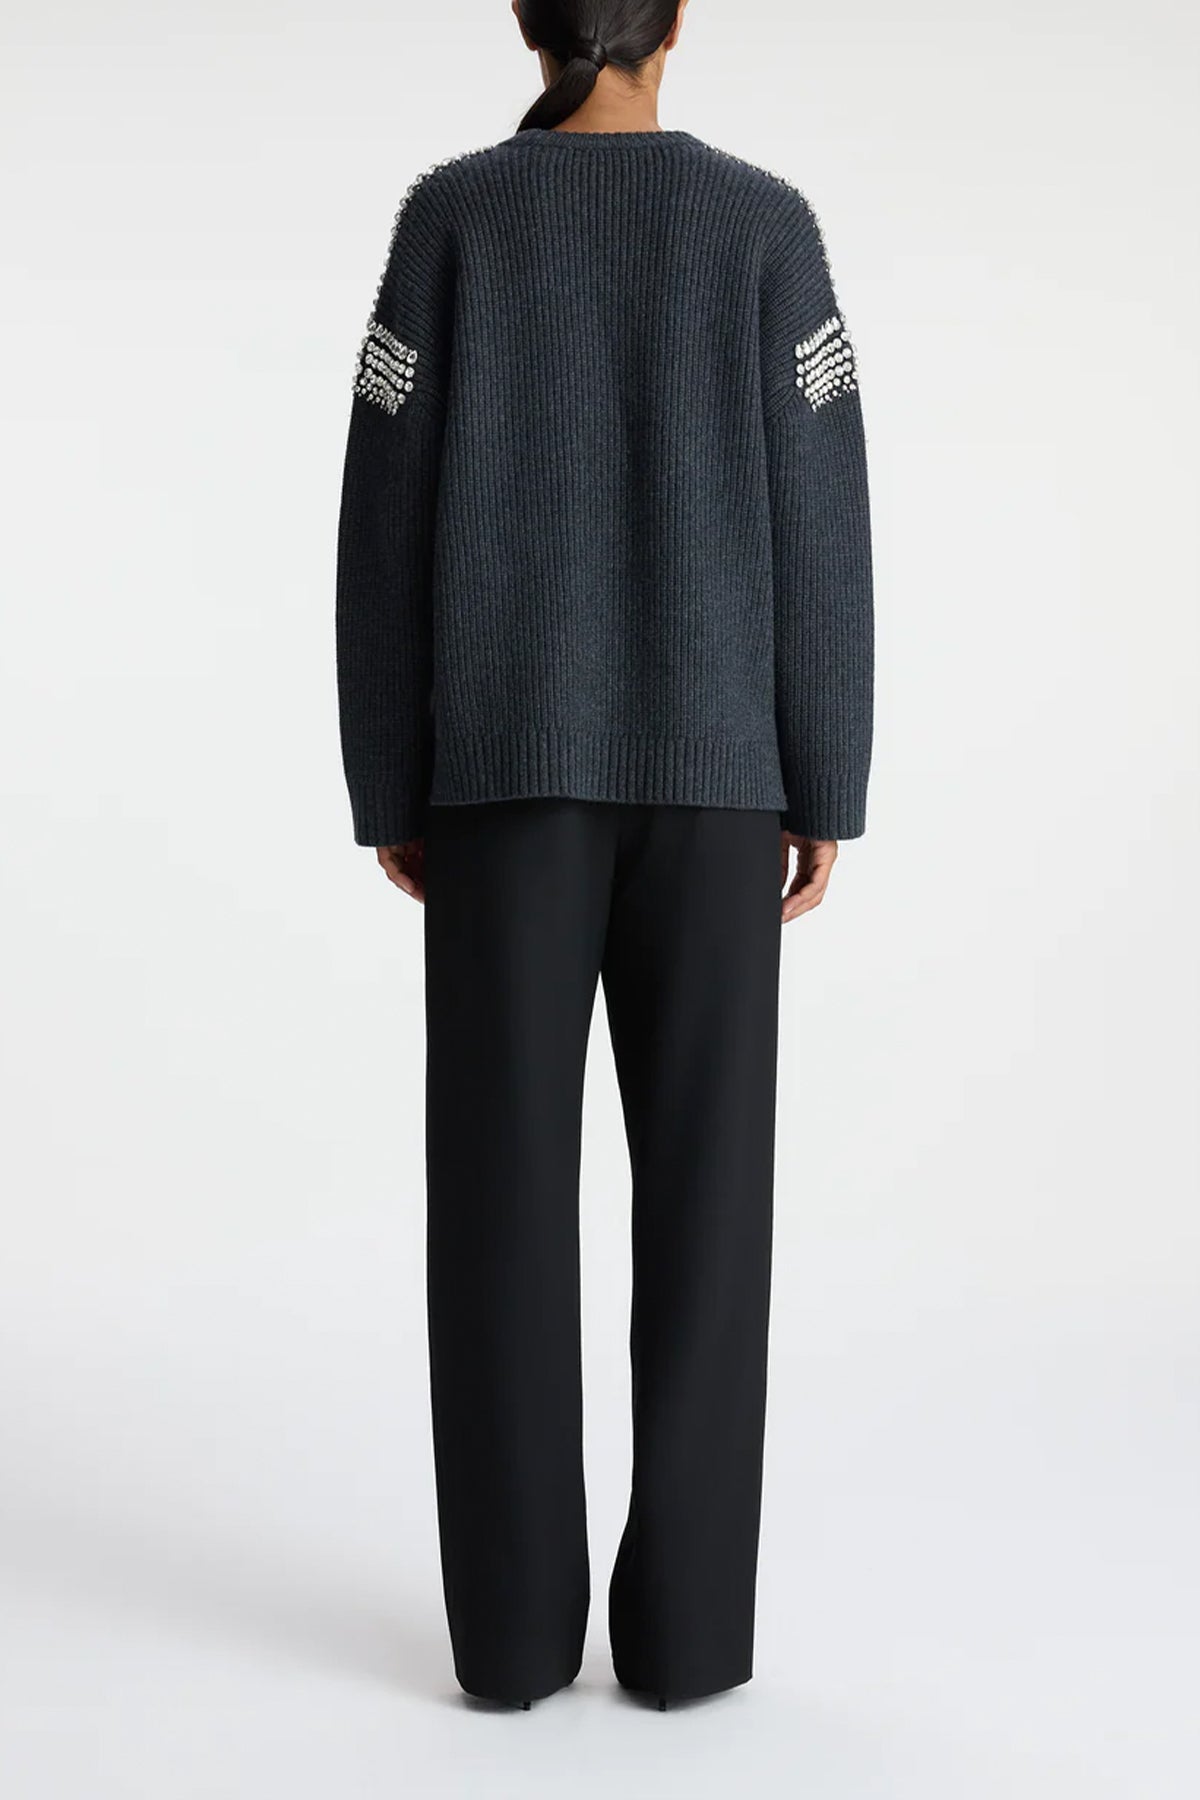 Colby Embellished Wool Sweater in Dark Heather Grey - shop-olivia.com